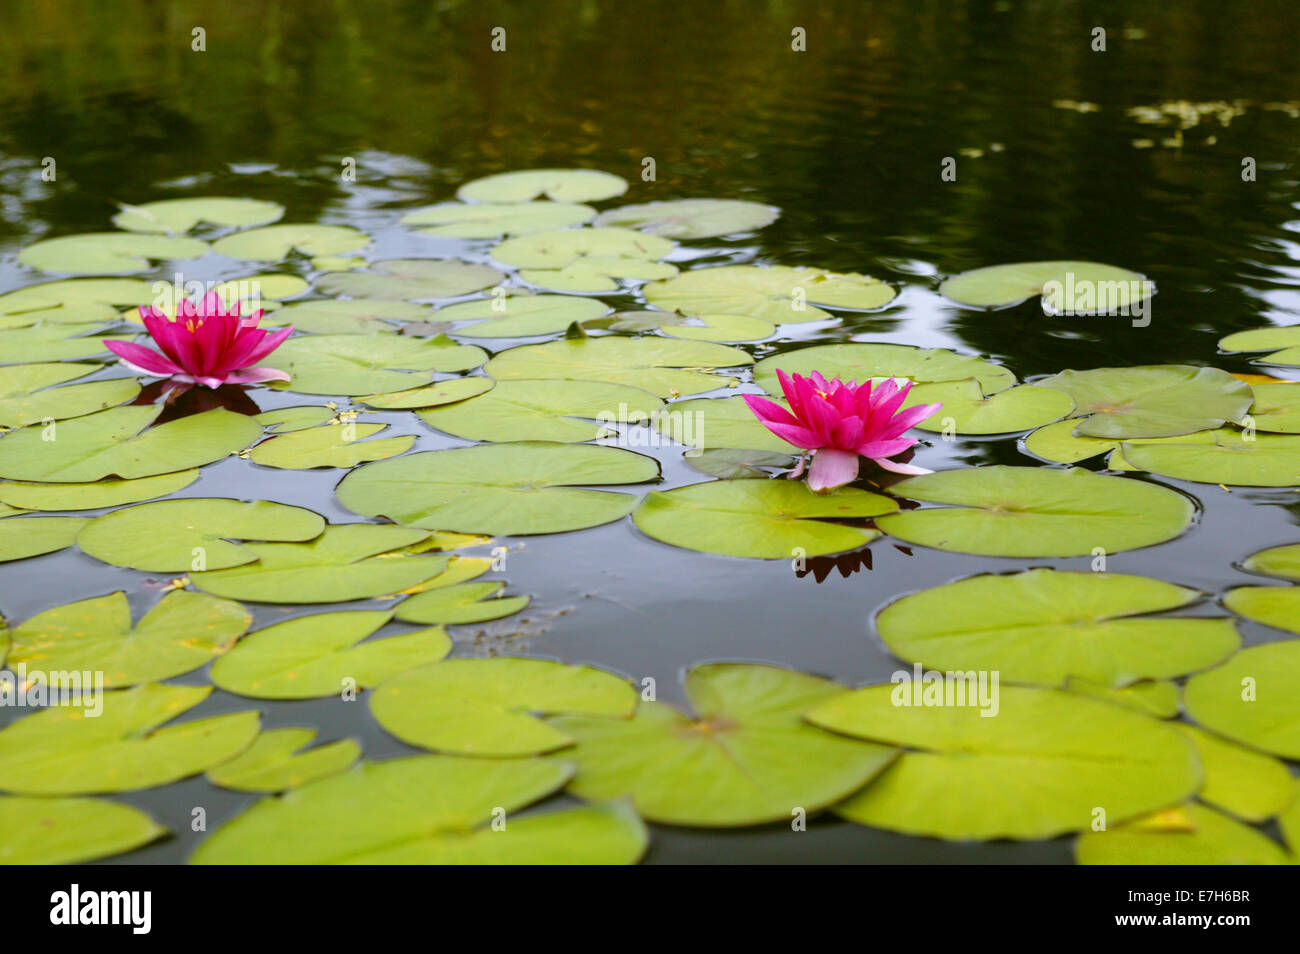 Two dark pink lily flowers in a pond with lily pads. Stock Photo